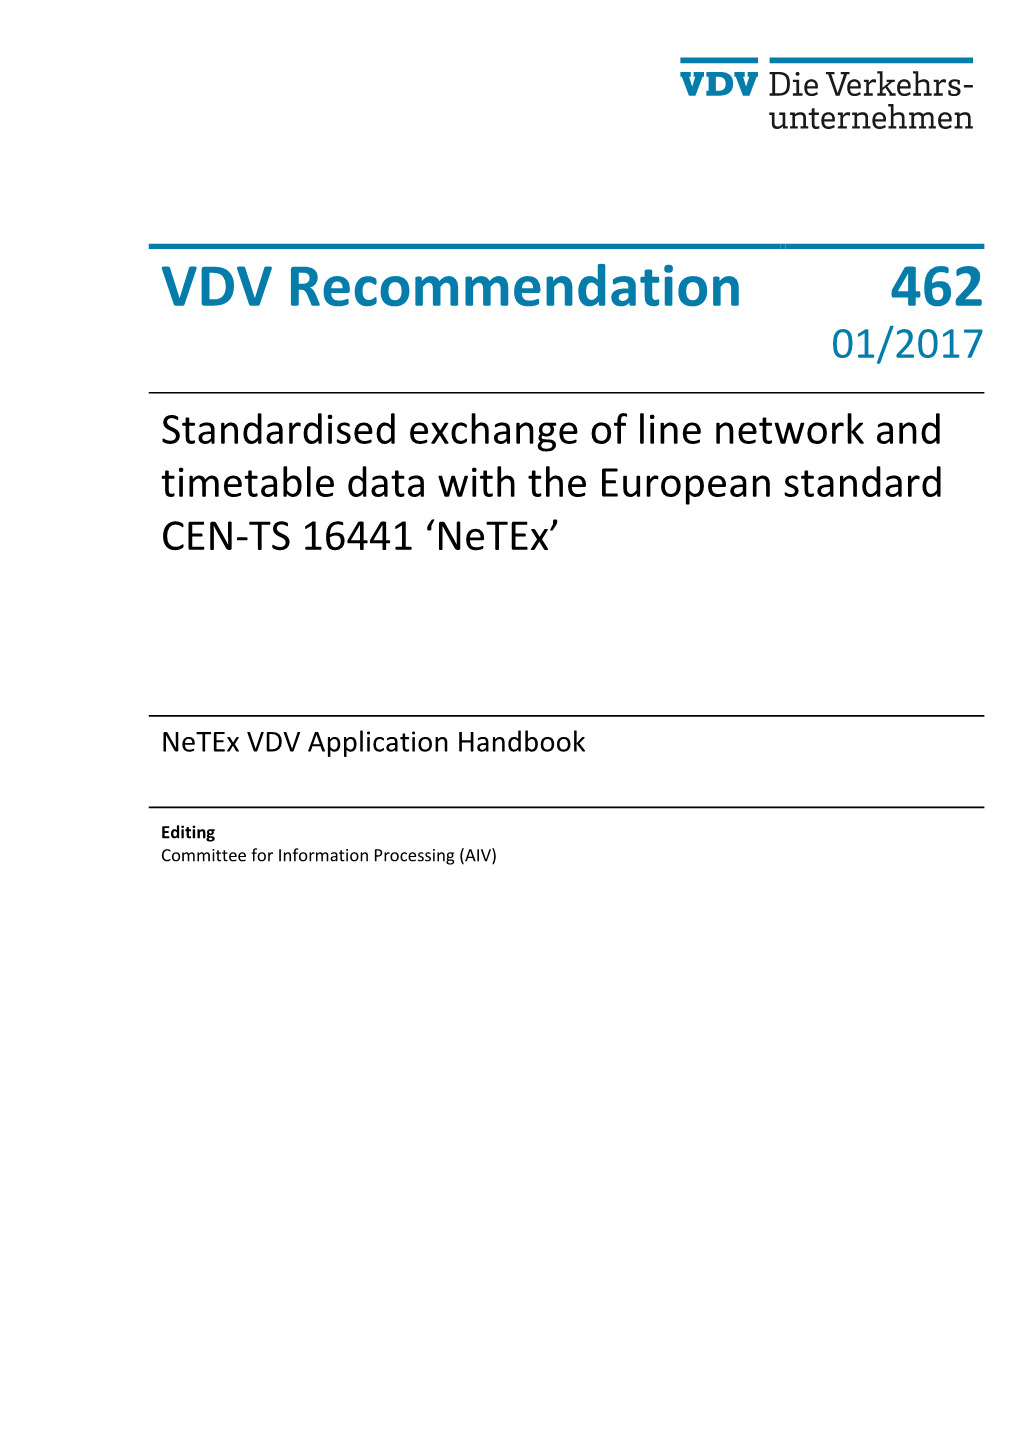 VDV Recommendation 462 01/2017 Standardised Exchange of Line Network and Timetable Data with the European Standard CEN-TS 16441 ‘Netex’